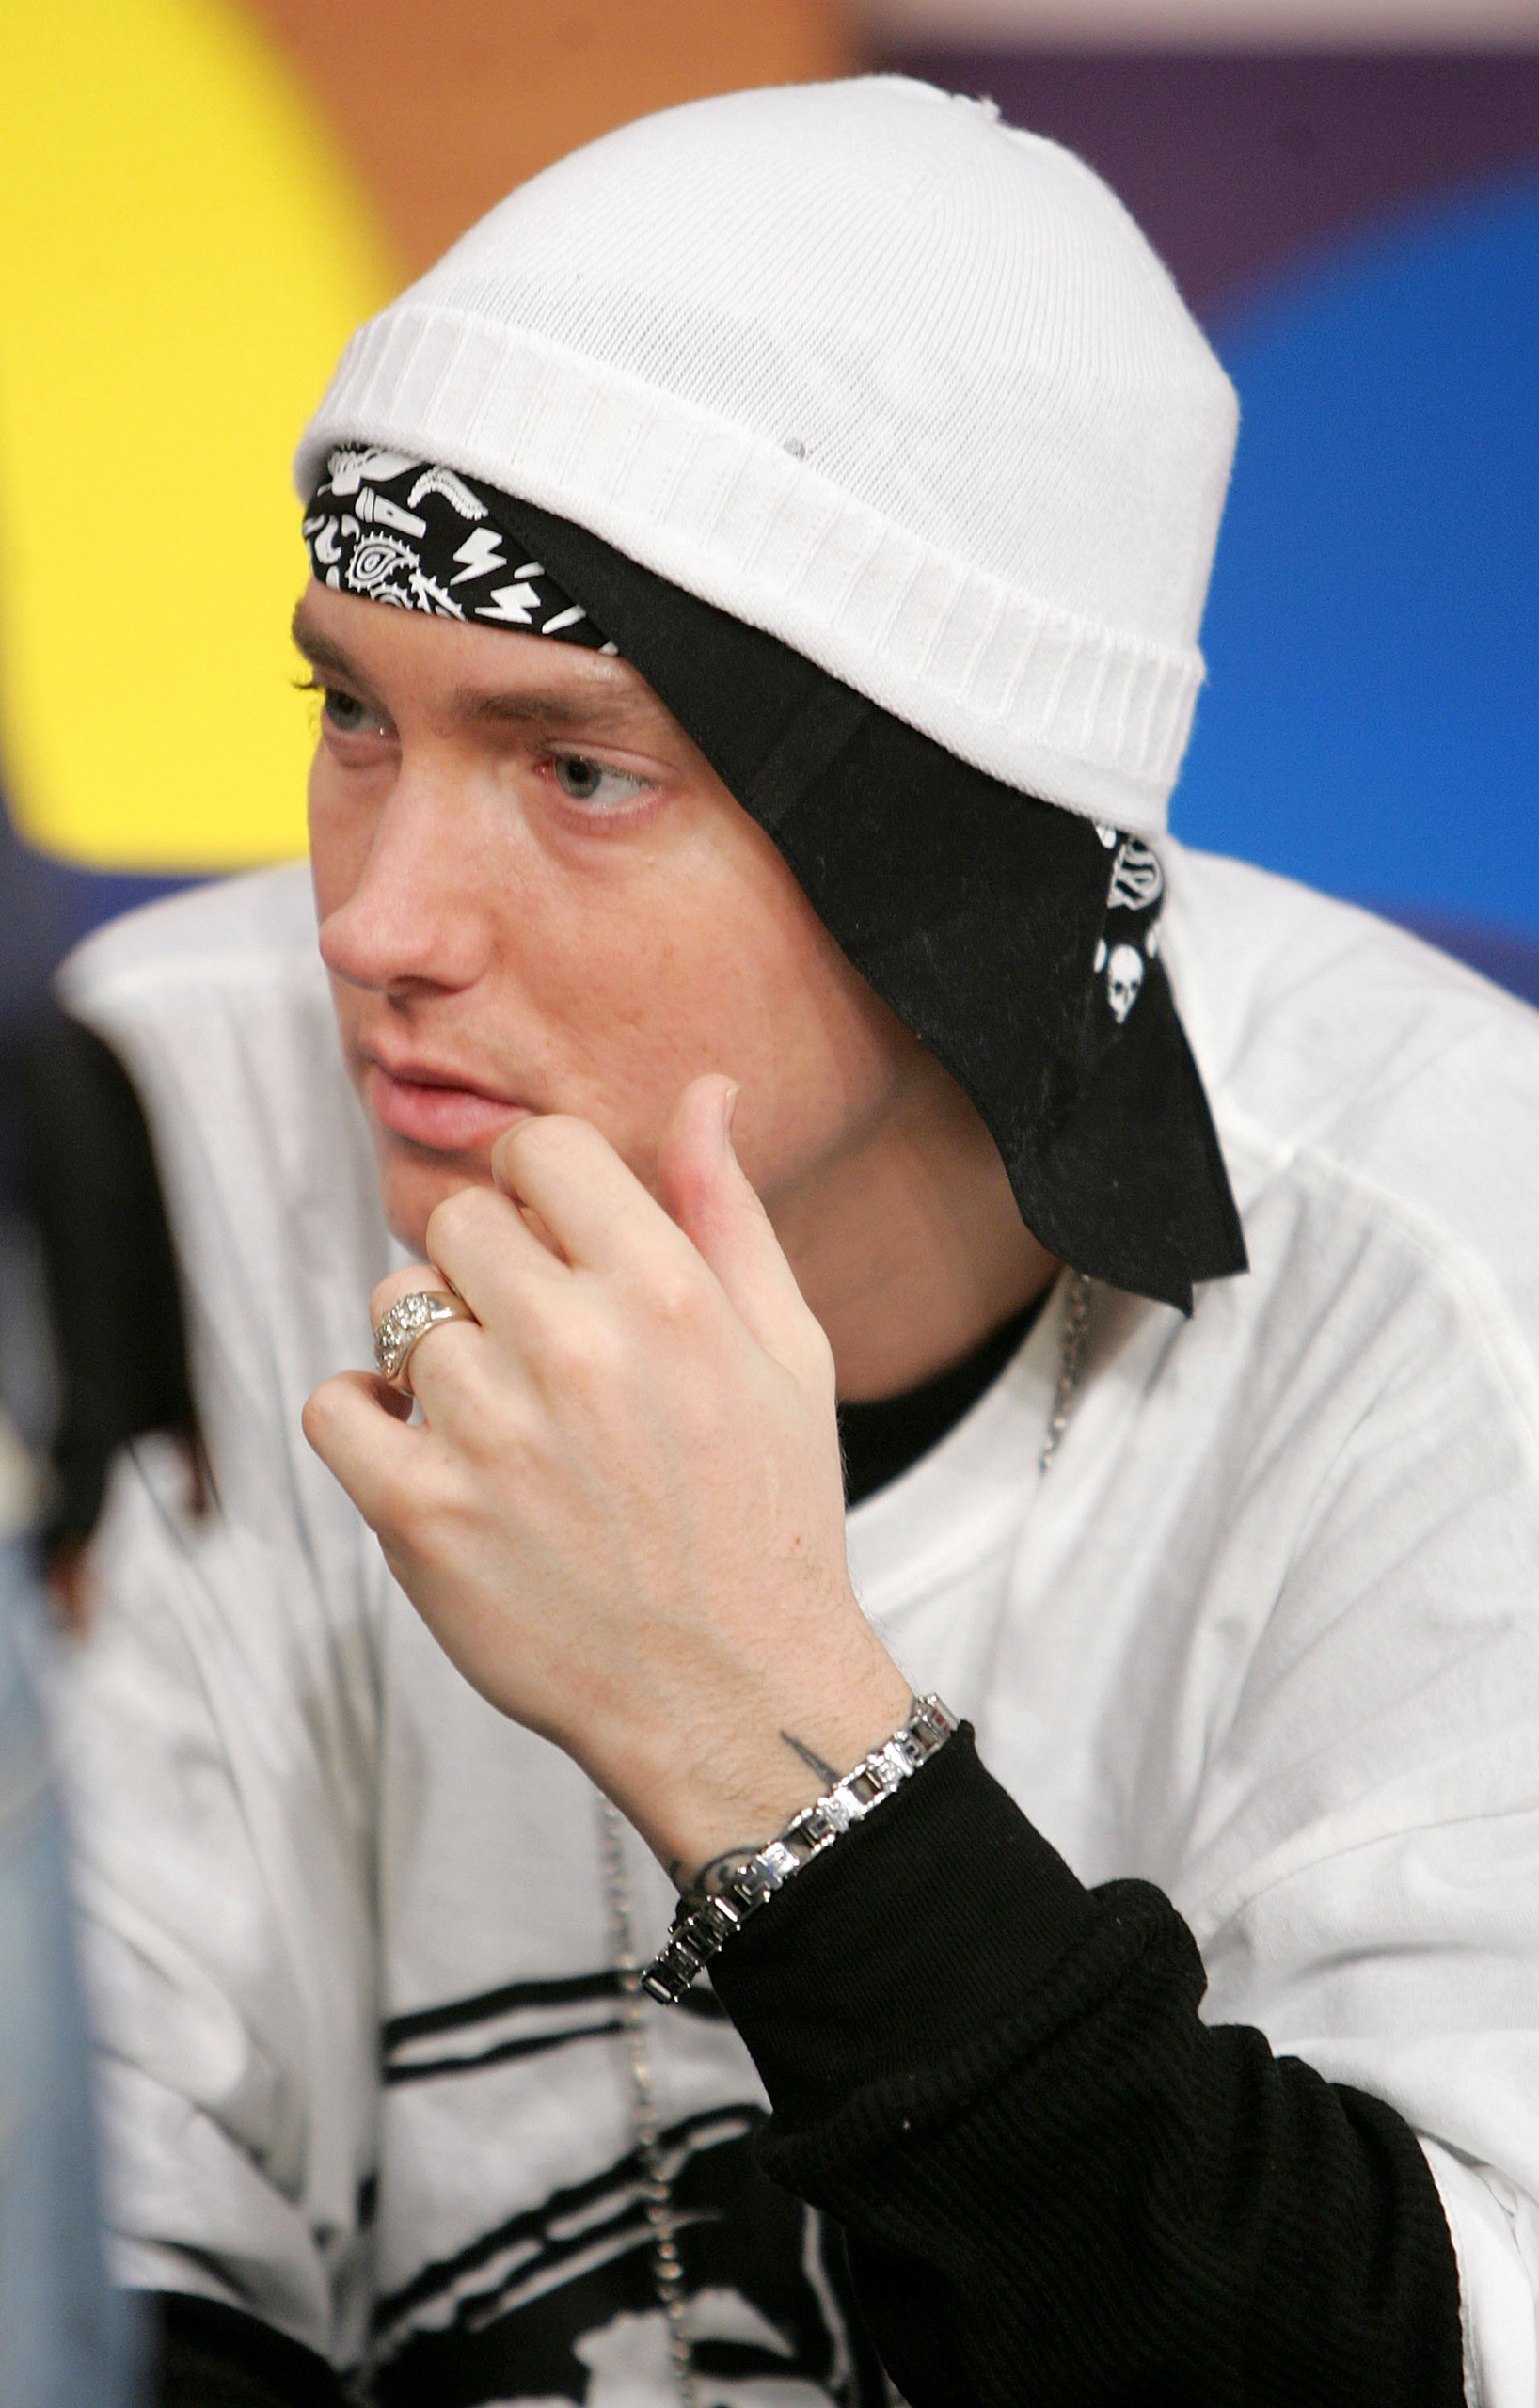 Exploring The Dark Side Of Slim Shady: A Look Into His Music And Persona